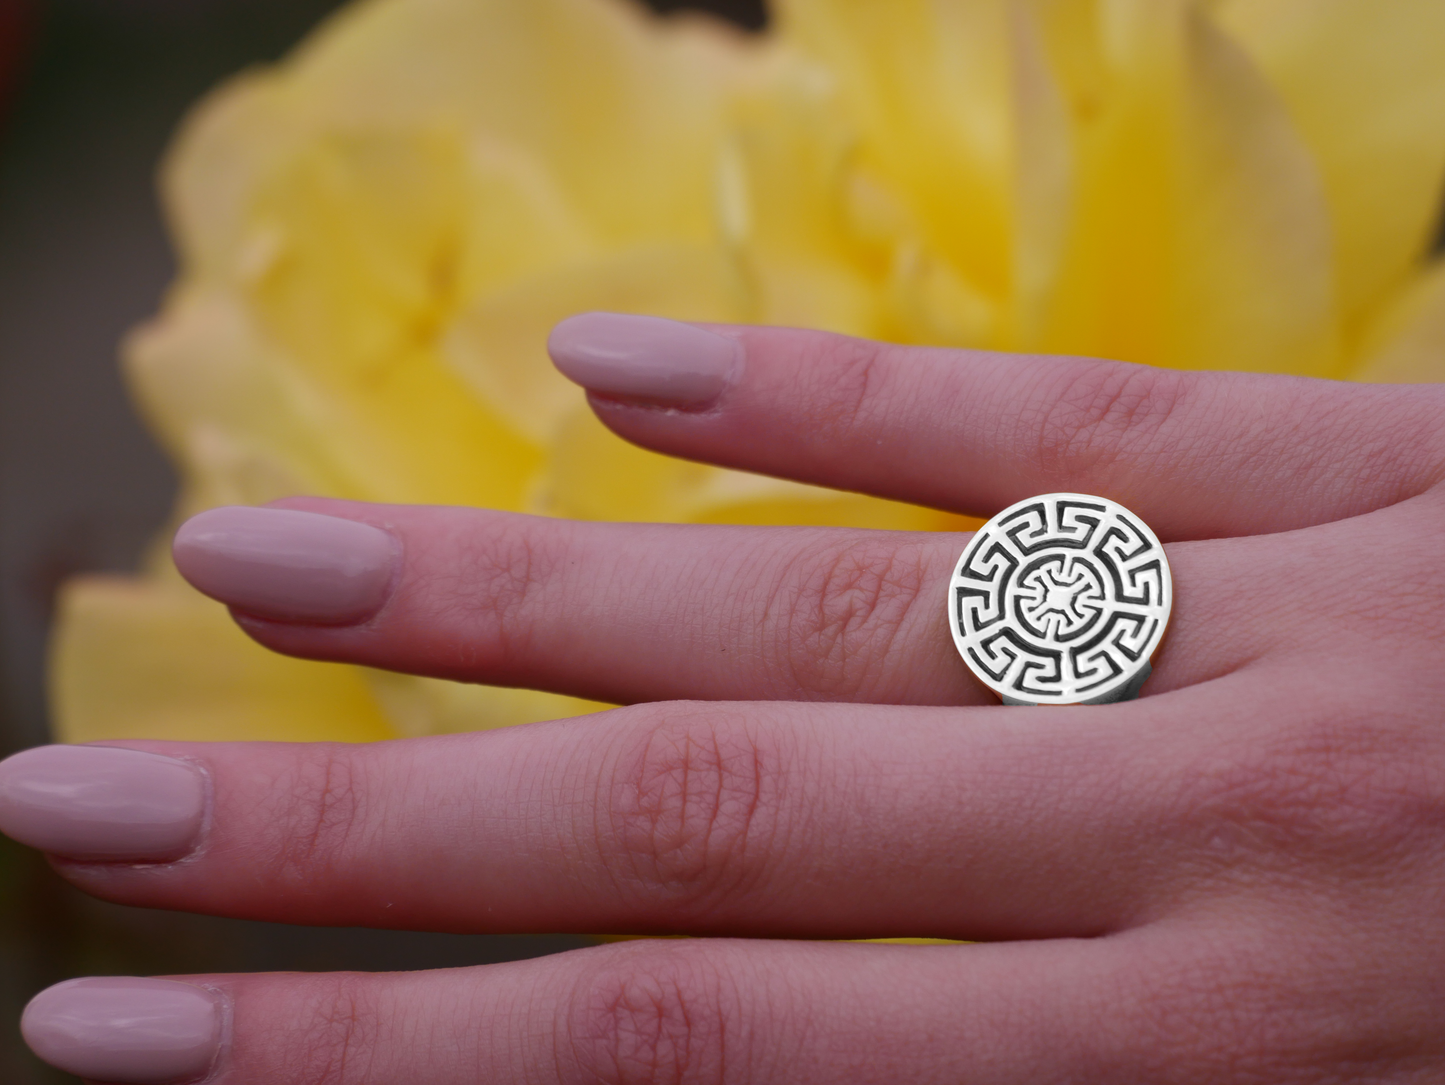 Silver Aztec Ring